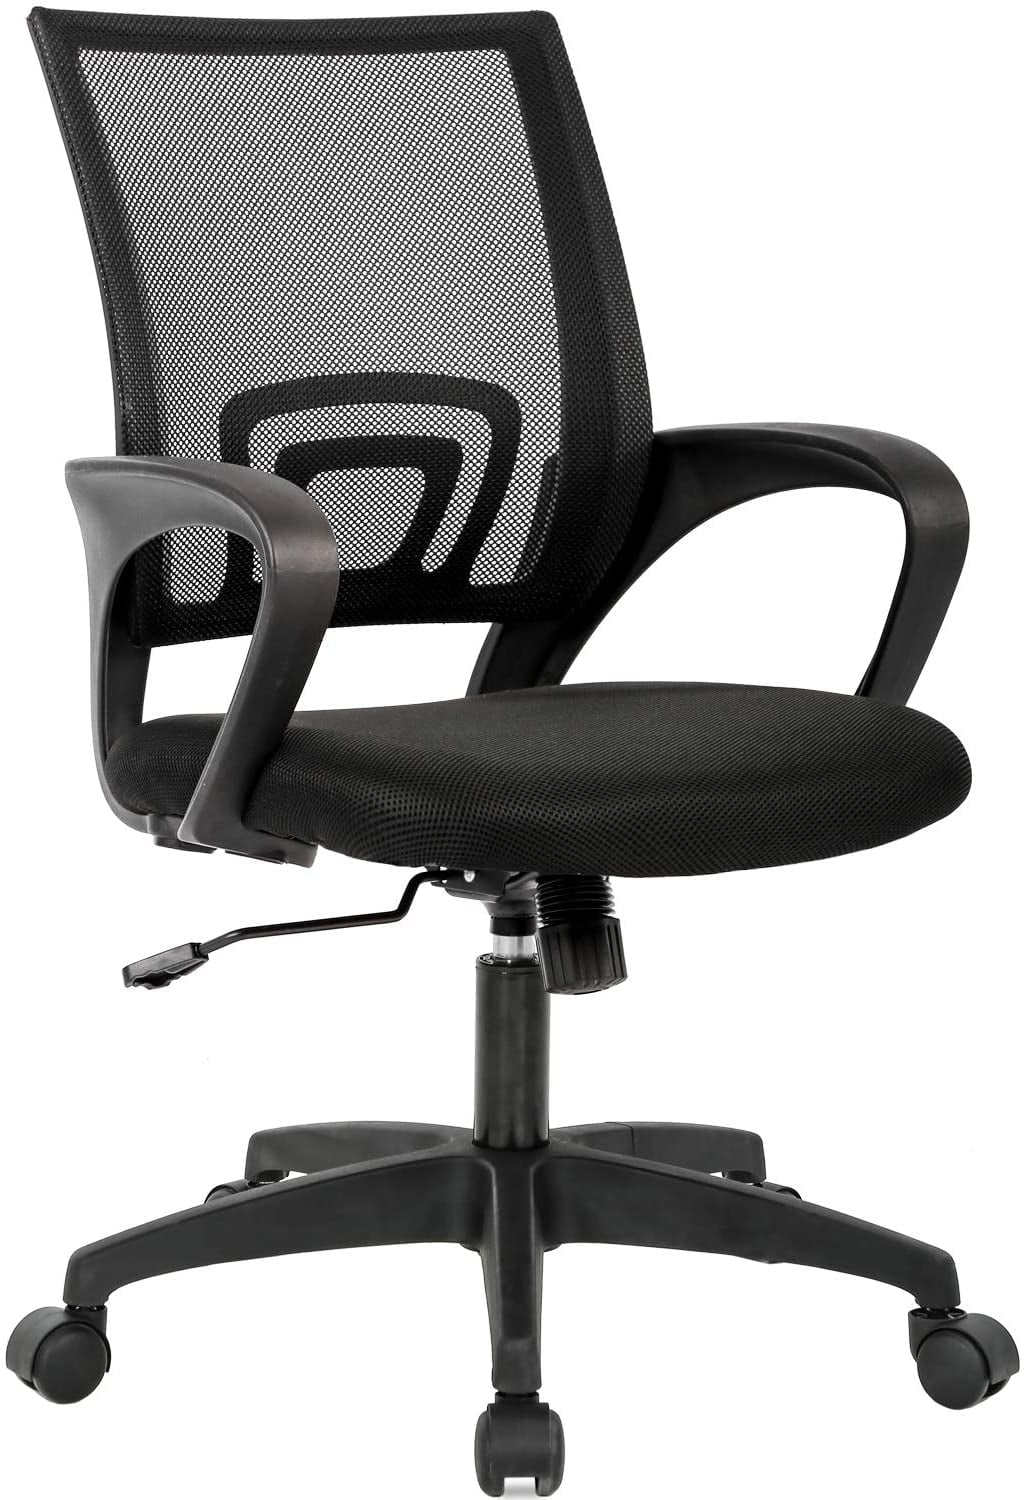 Black Office Chair Mid Back Mesh Task Chair Comfortable Lumbar Support Rolling Swivel Chair Ergonomic Computer Desk Chair with Armrest 